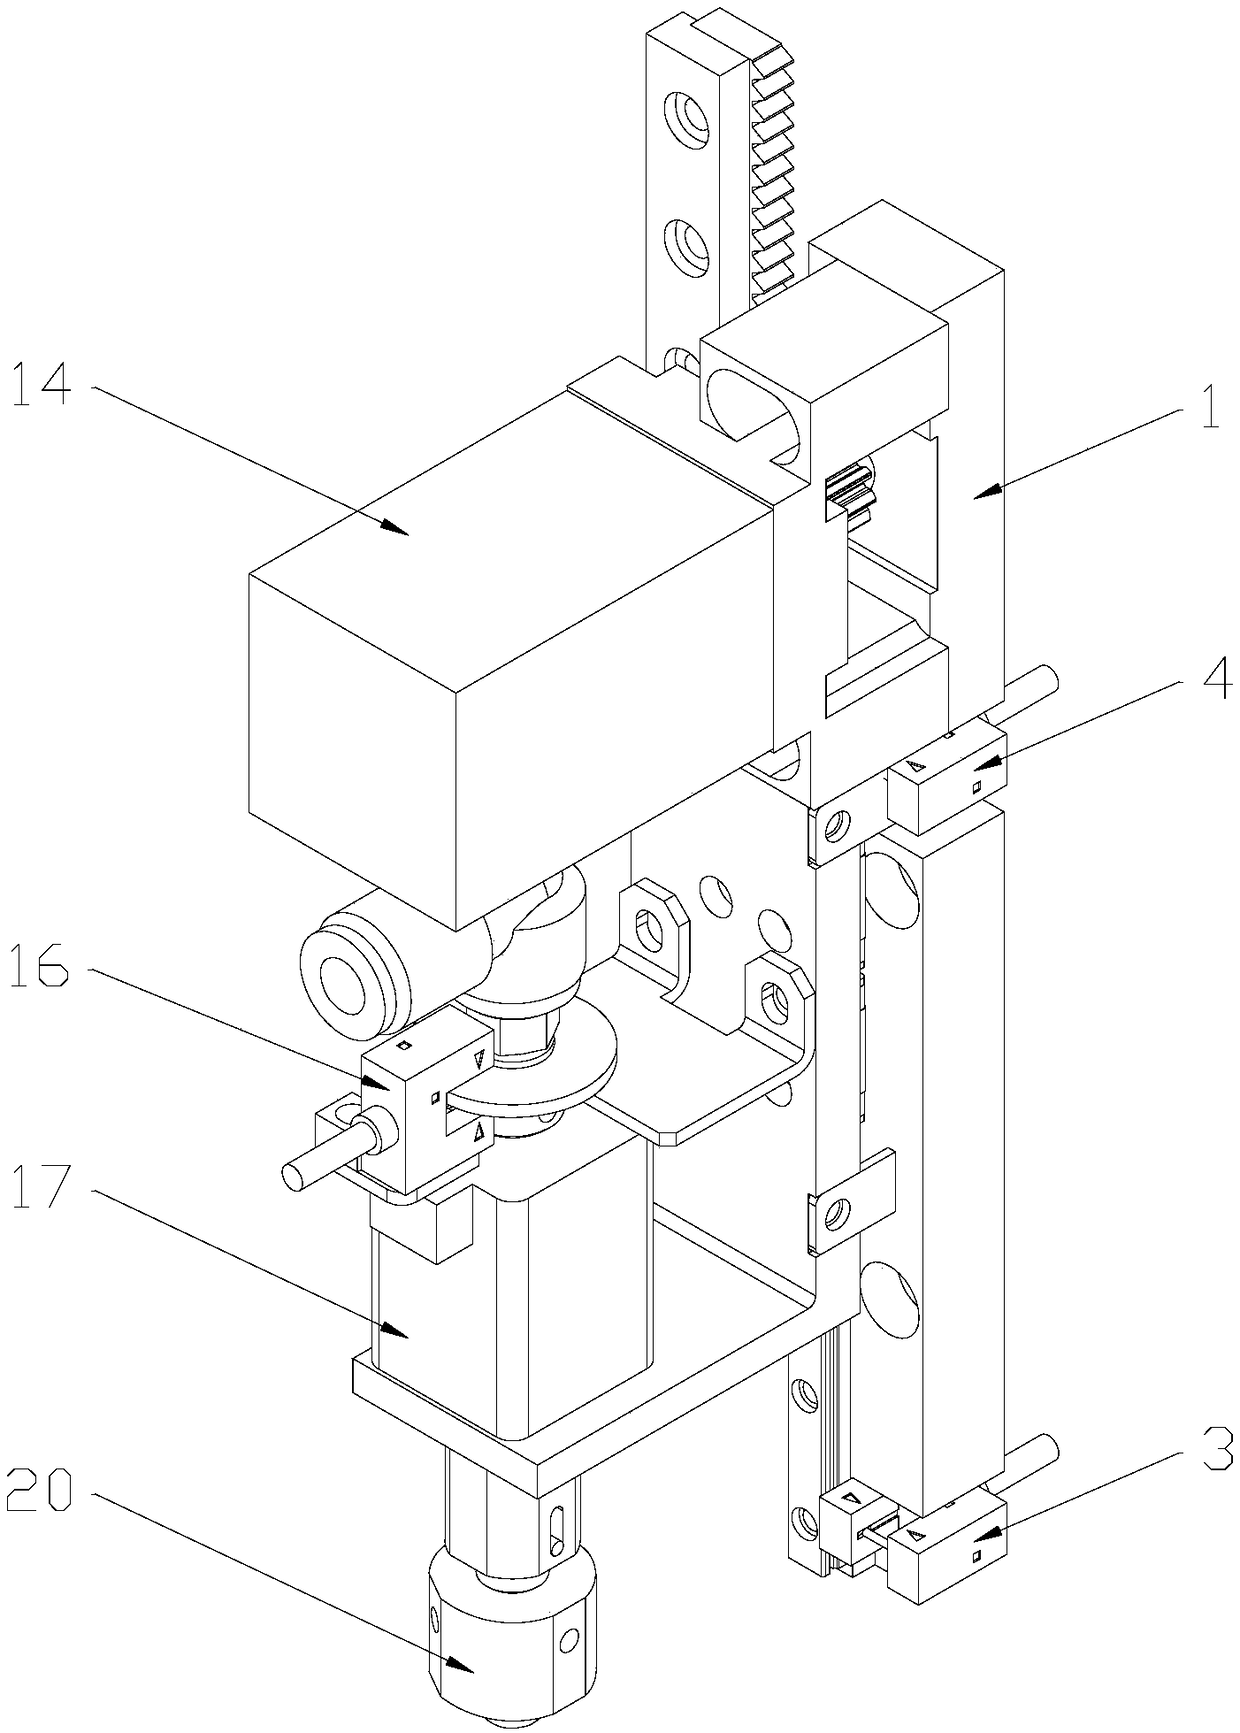 Novel material suction nozzle device